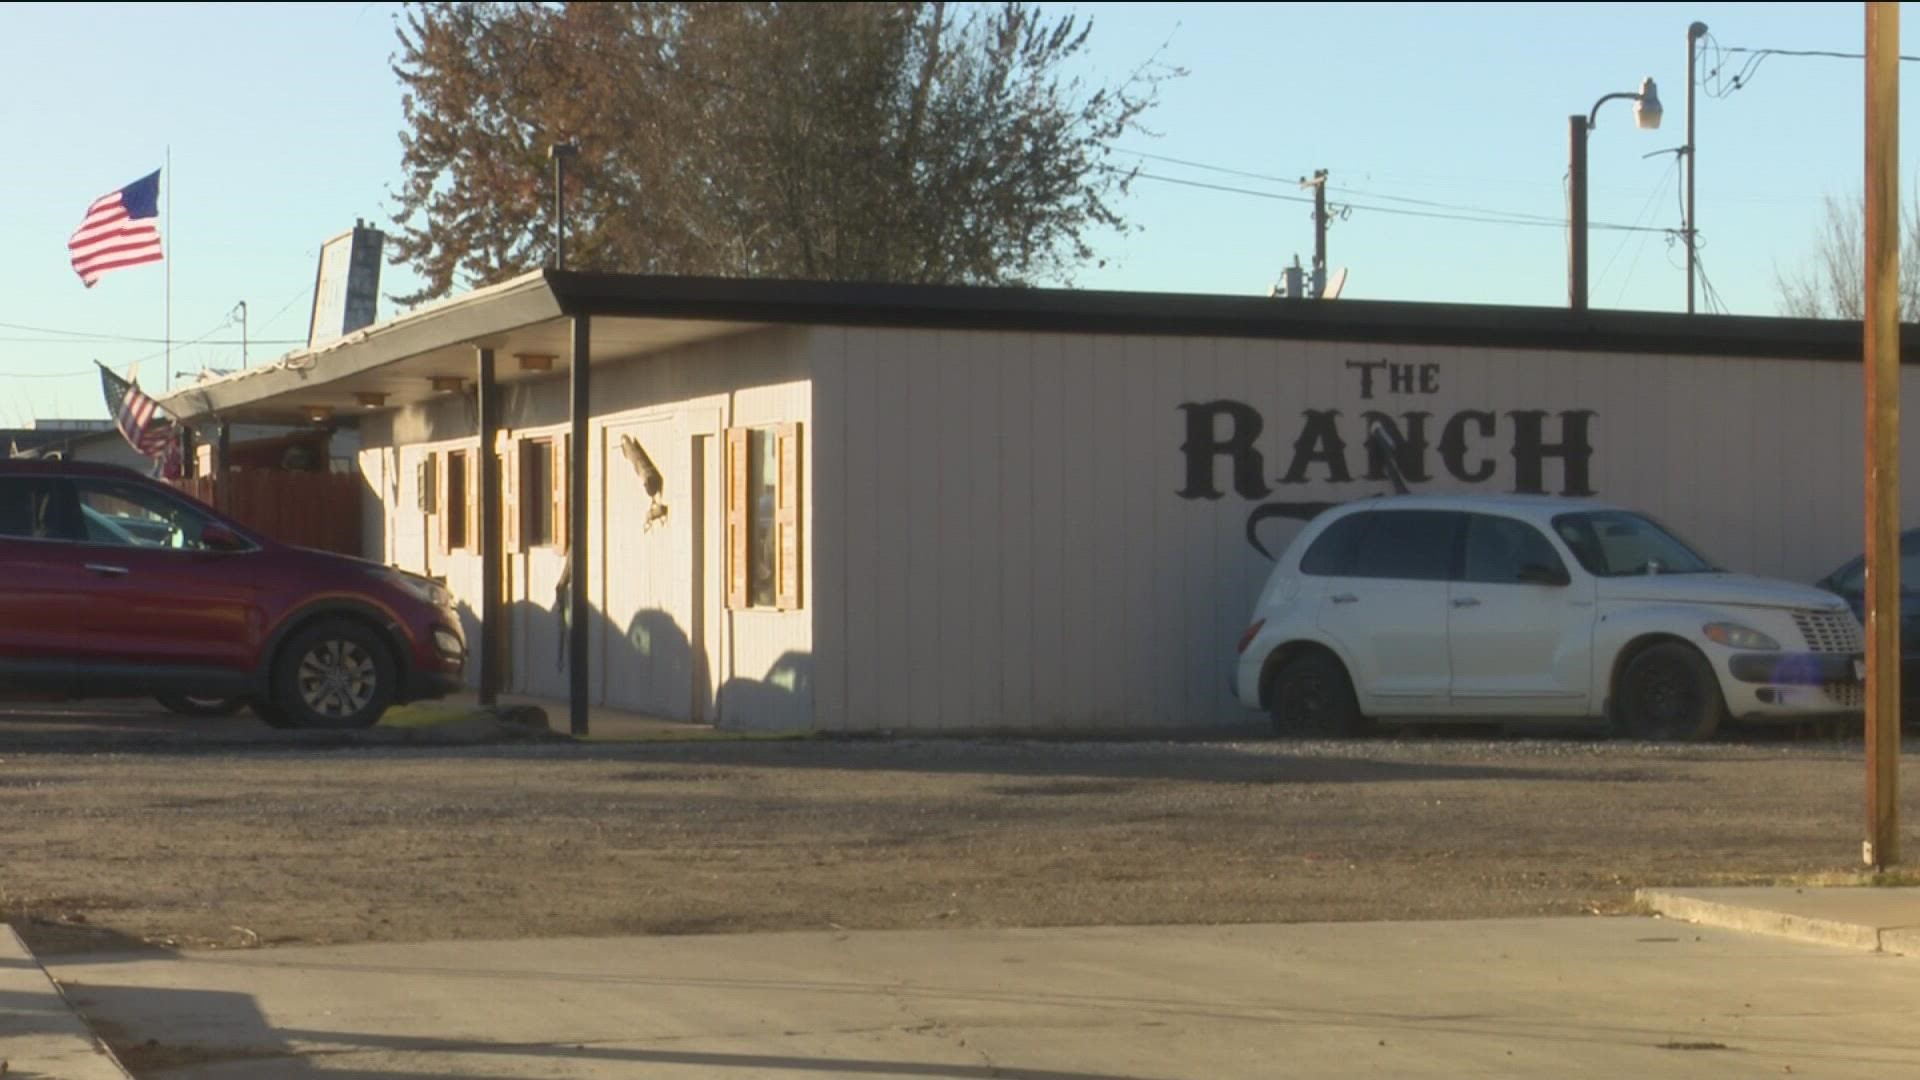 Caldwell Police are searching for a suspect they believe may have shot a gun outside of The Ranch early Saturday morning.